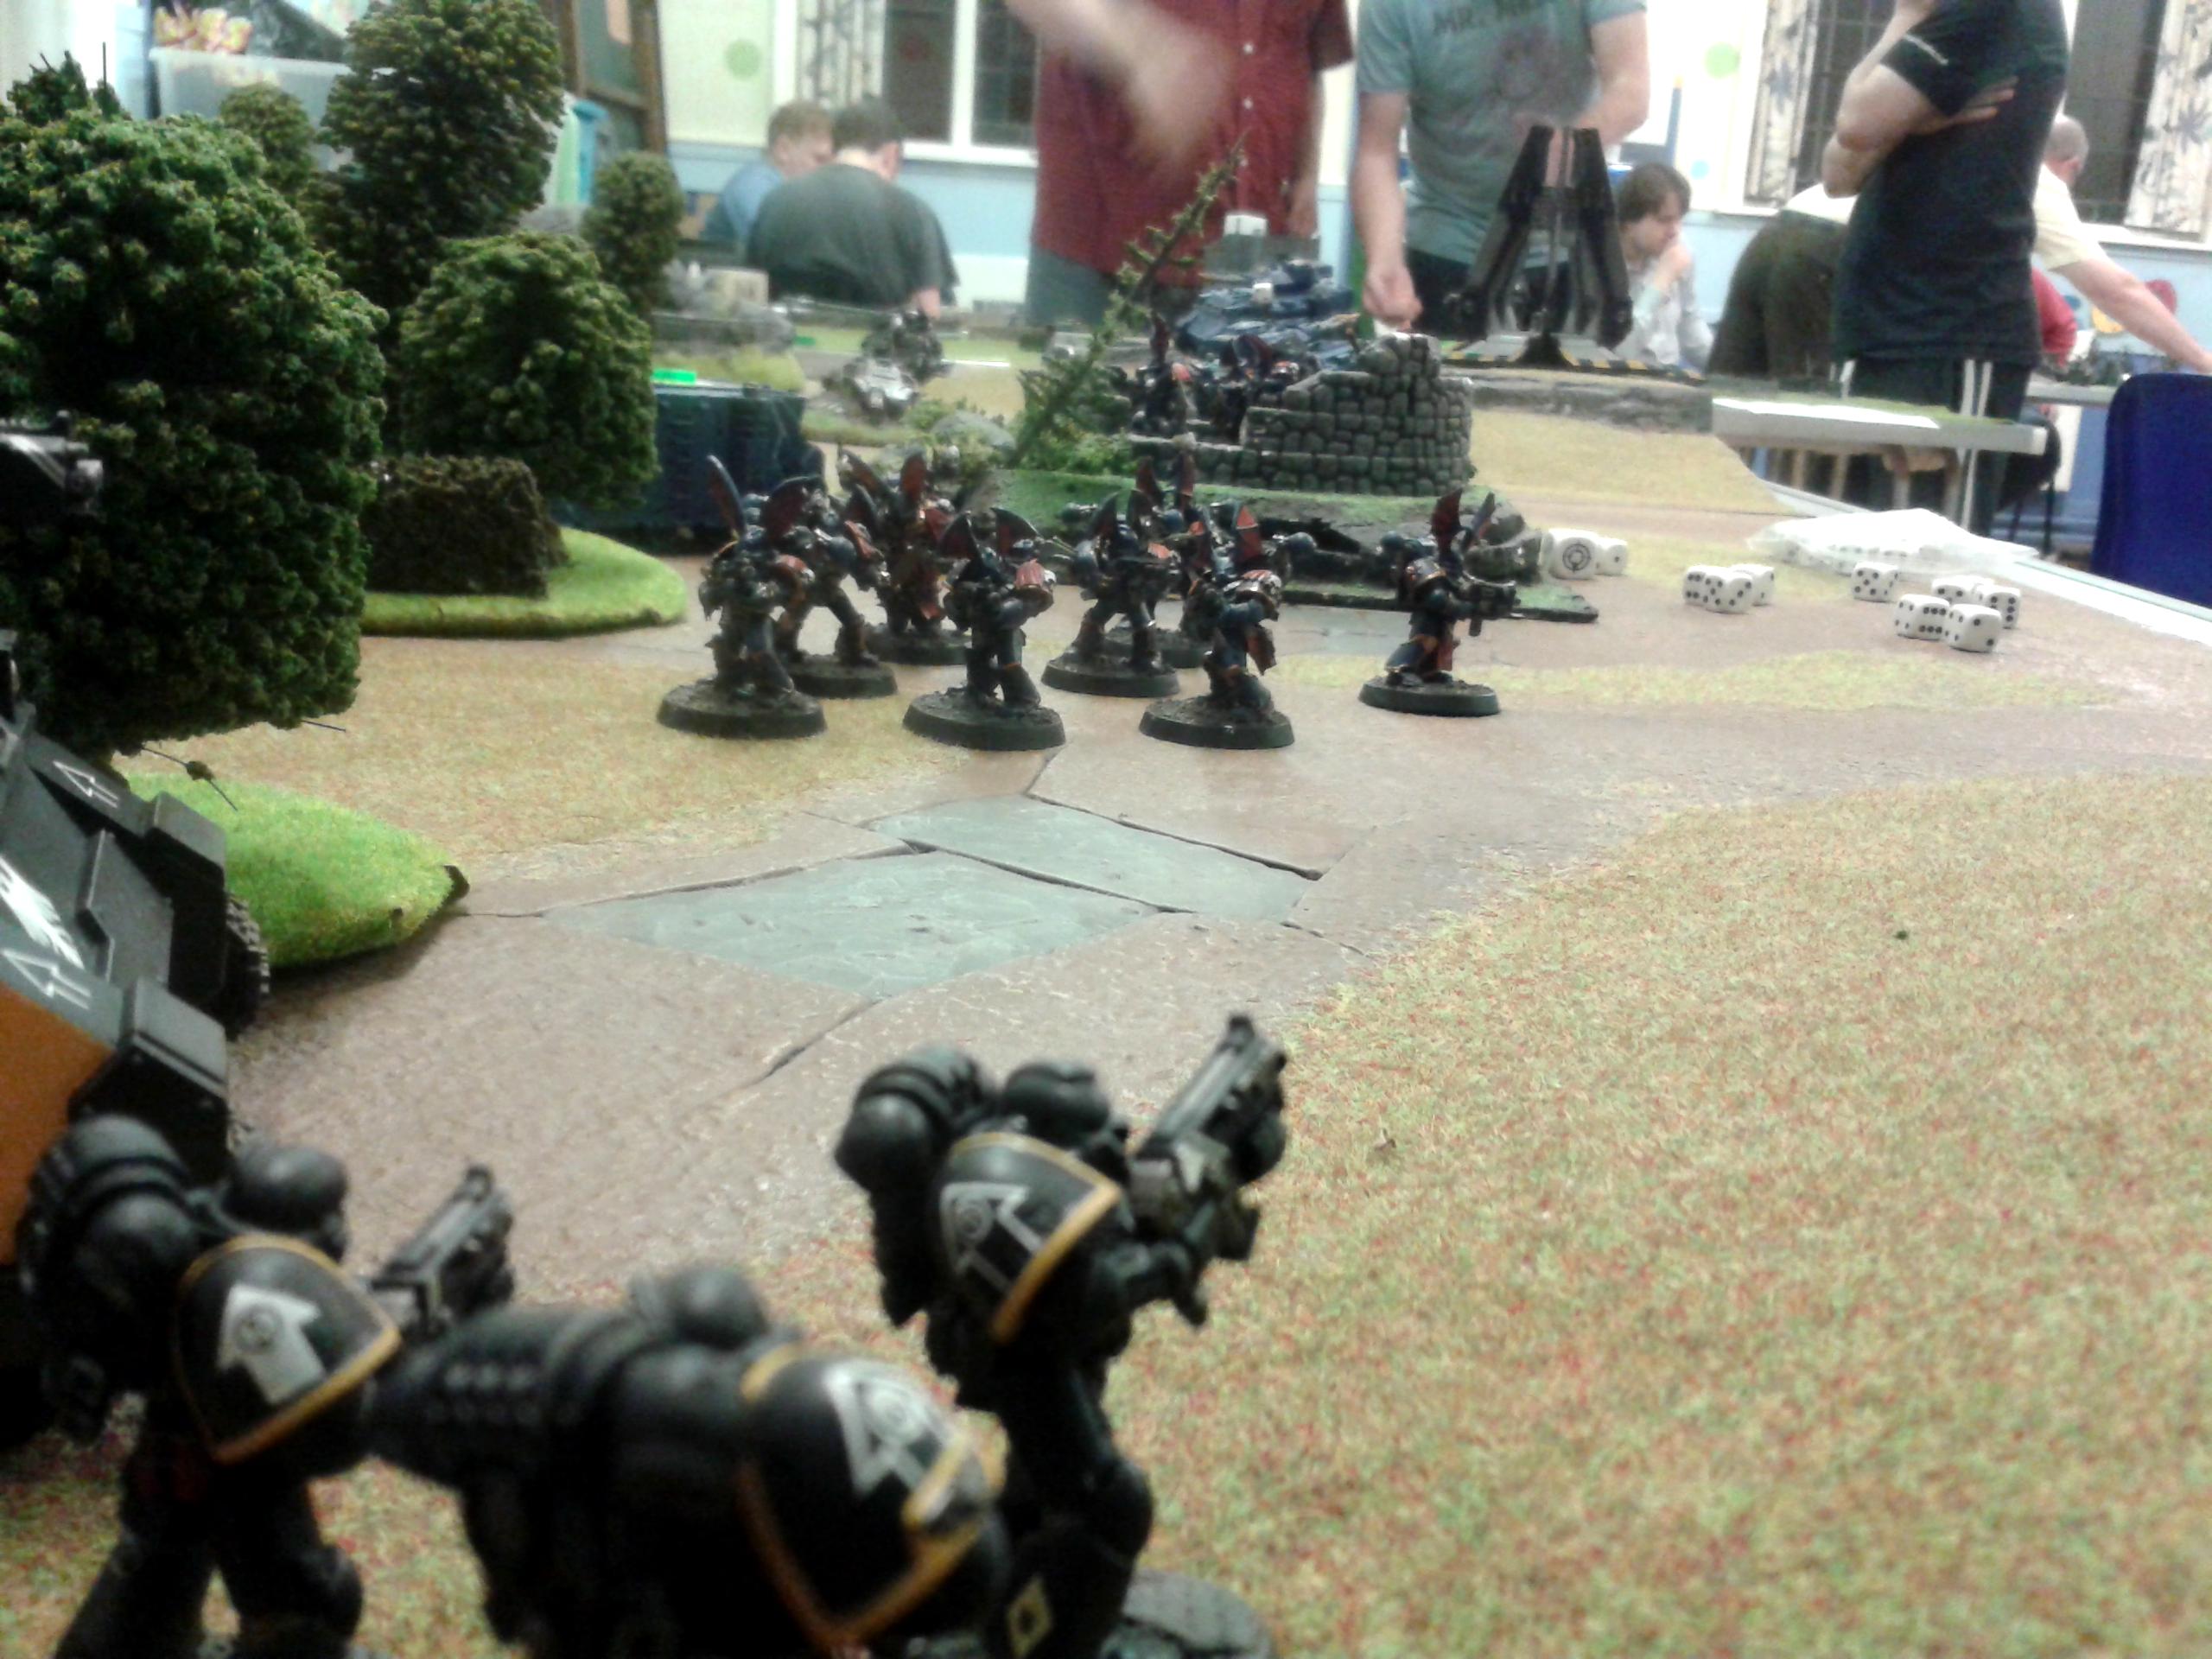 Battle, Chaos, Guard, Lords, Night, Raven, Report, Space, Space Marines, Warhammer 40,000, Warhammer Fantasy